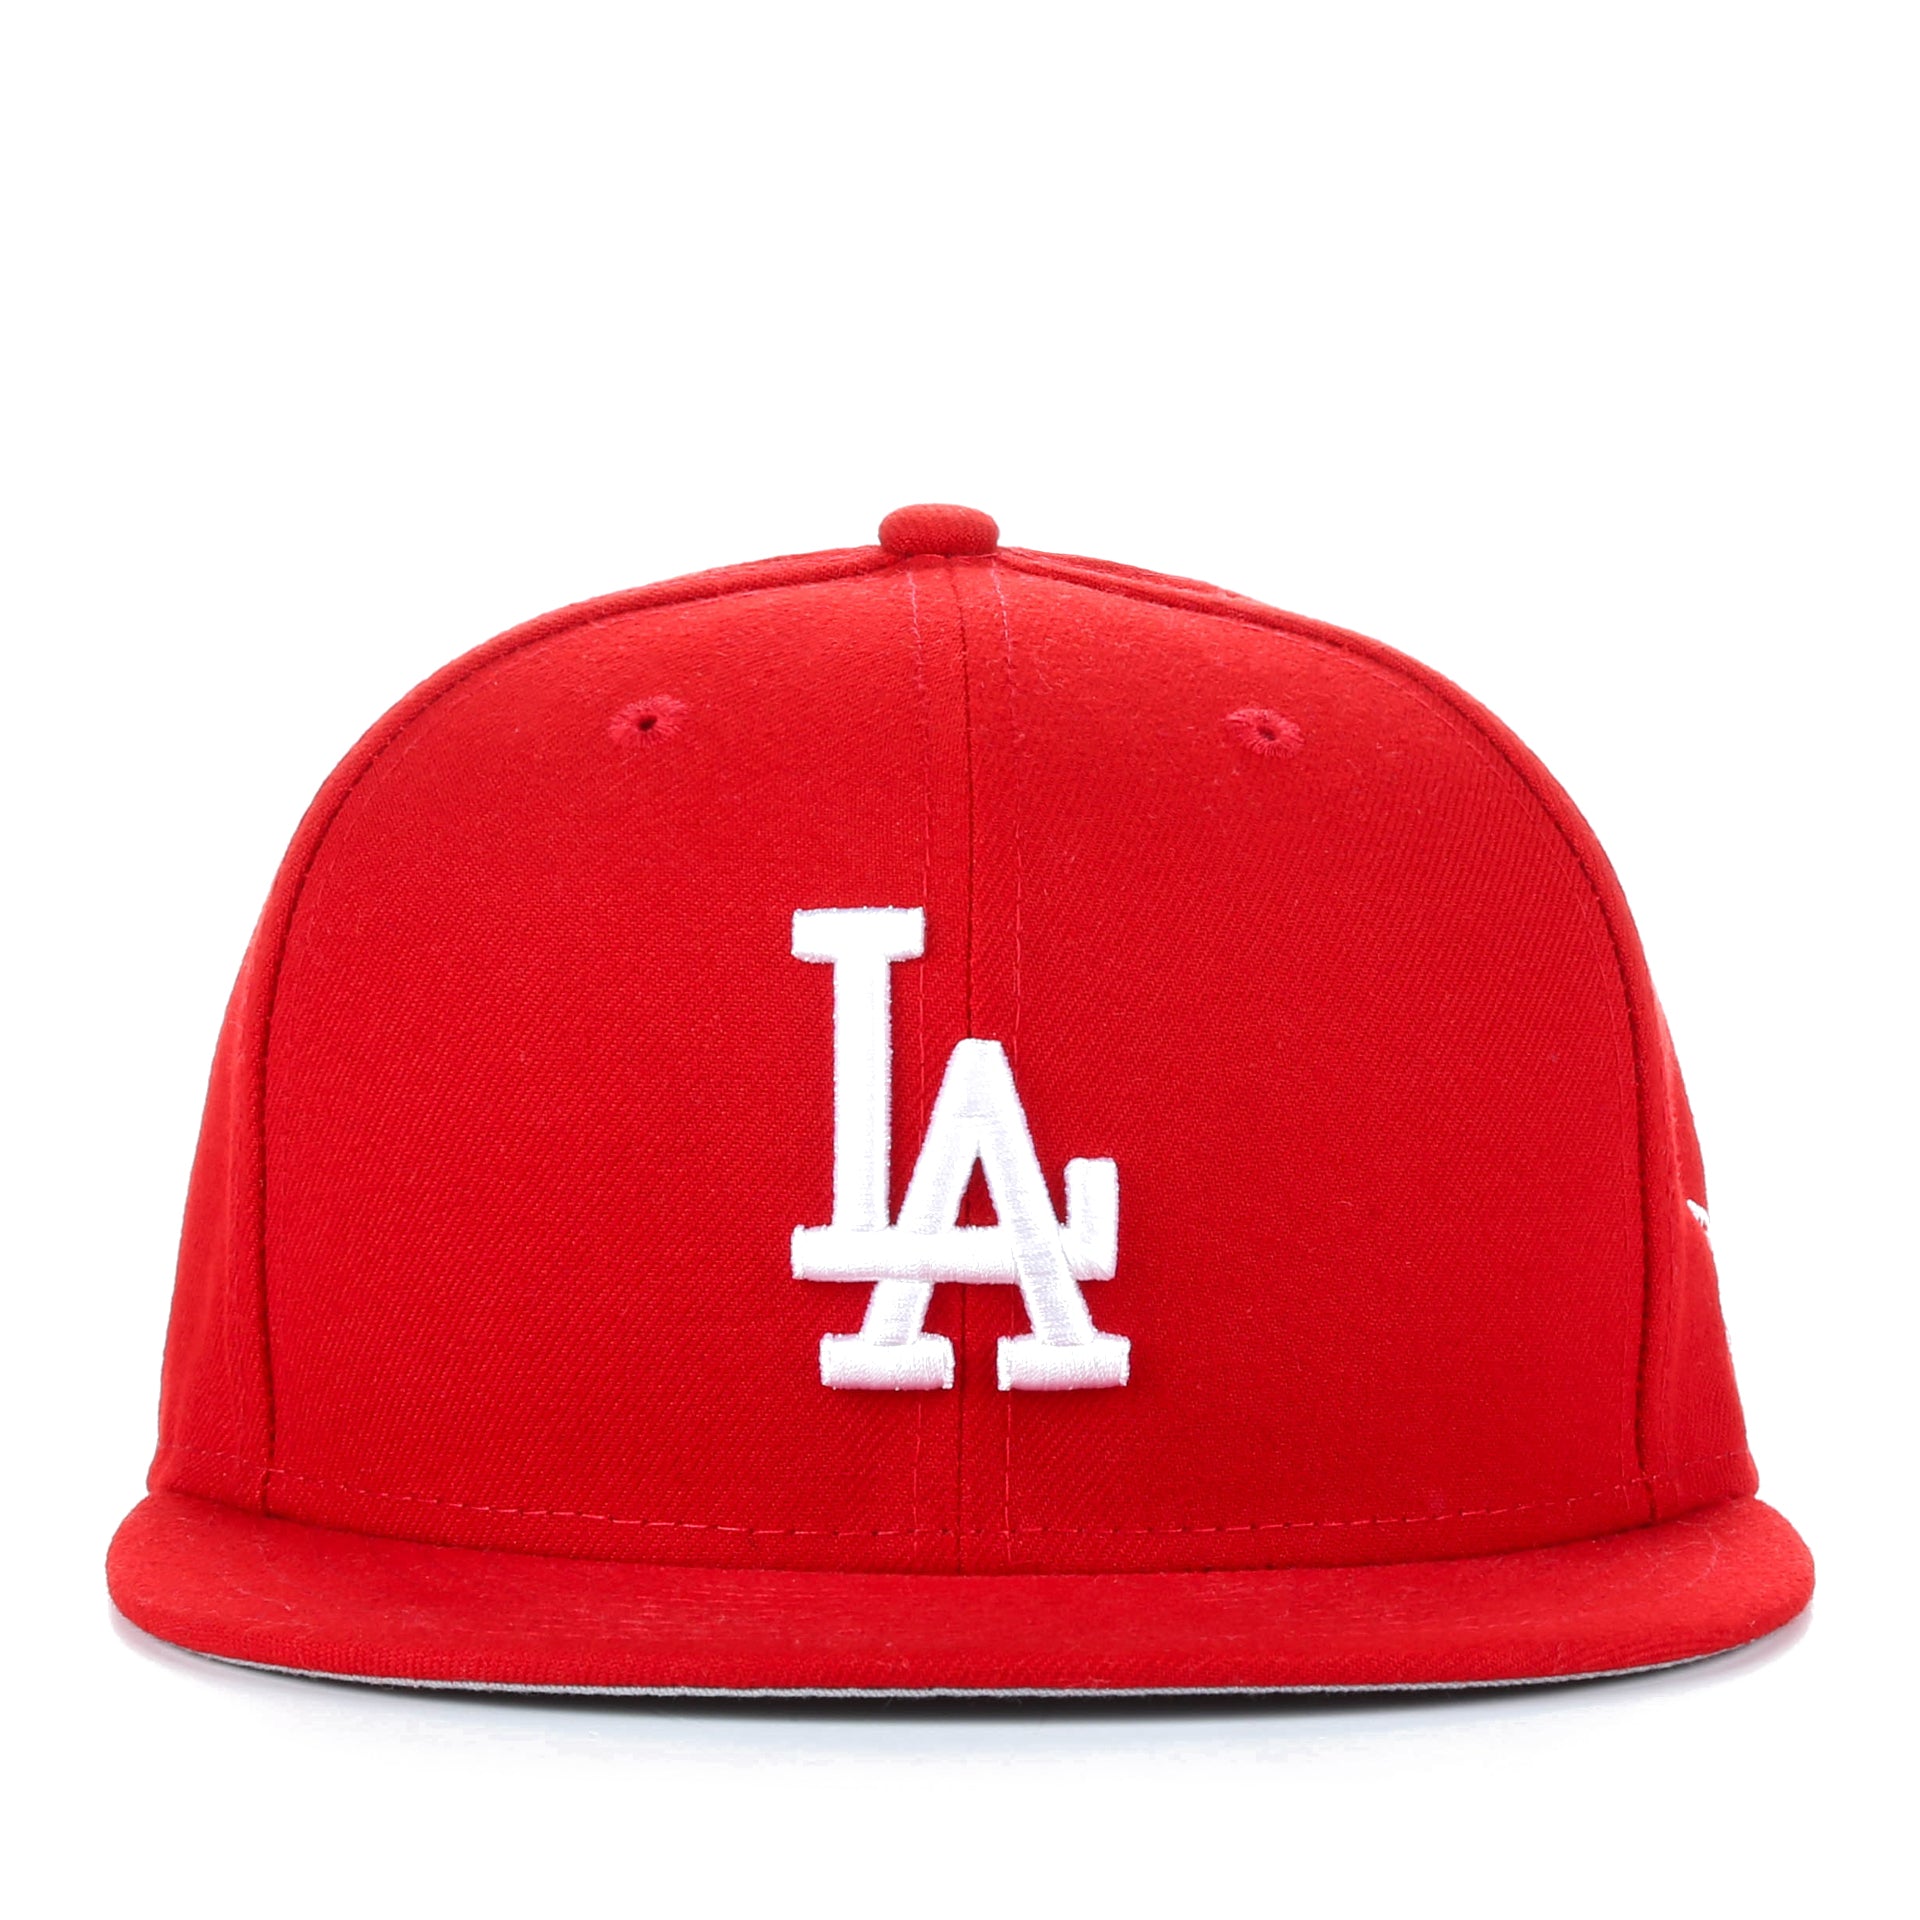 Jersey BASEBALL DODGERS RED